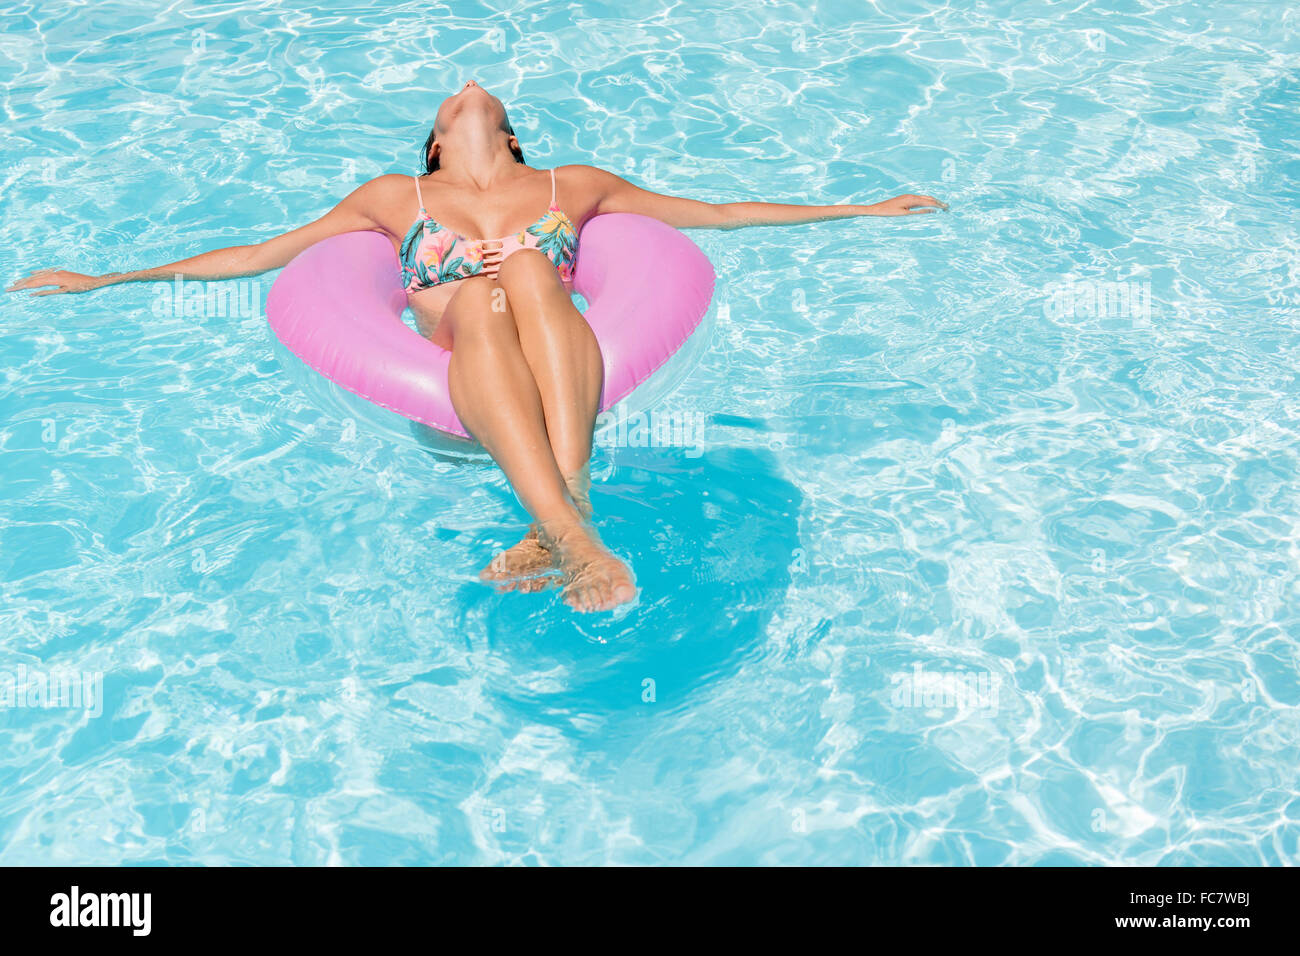 Caucasian woman floating in swimming pool Banque D'Images